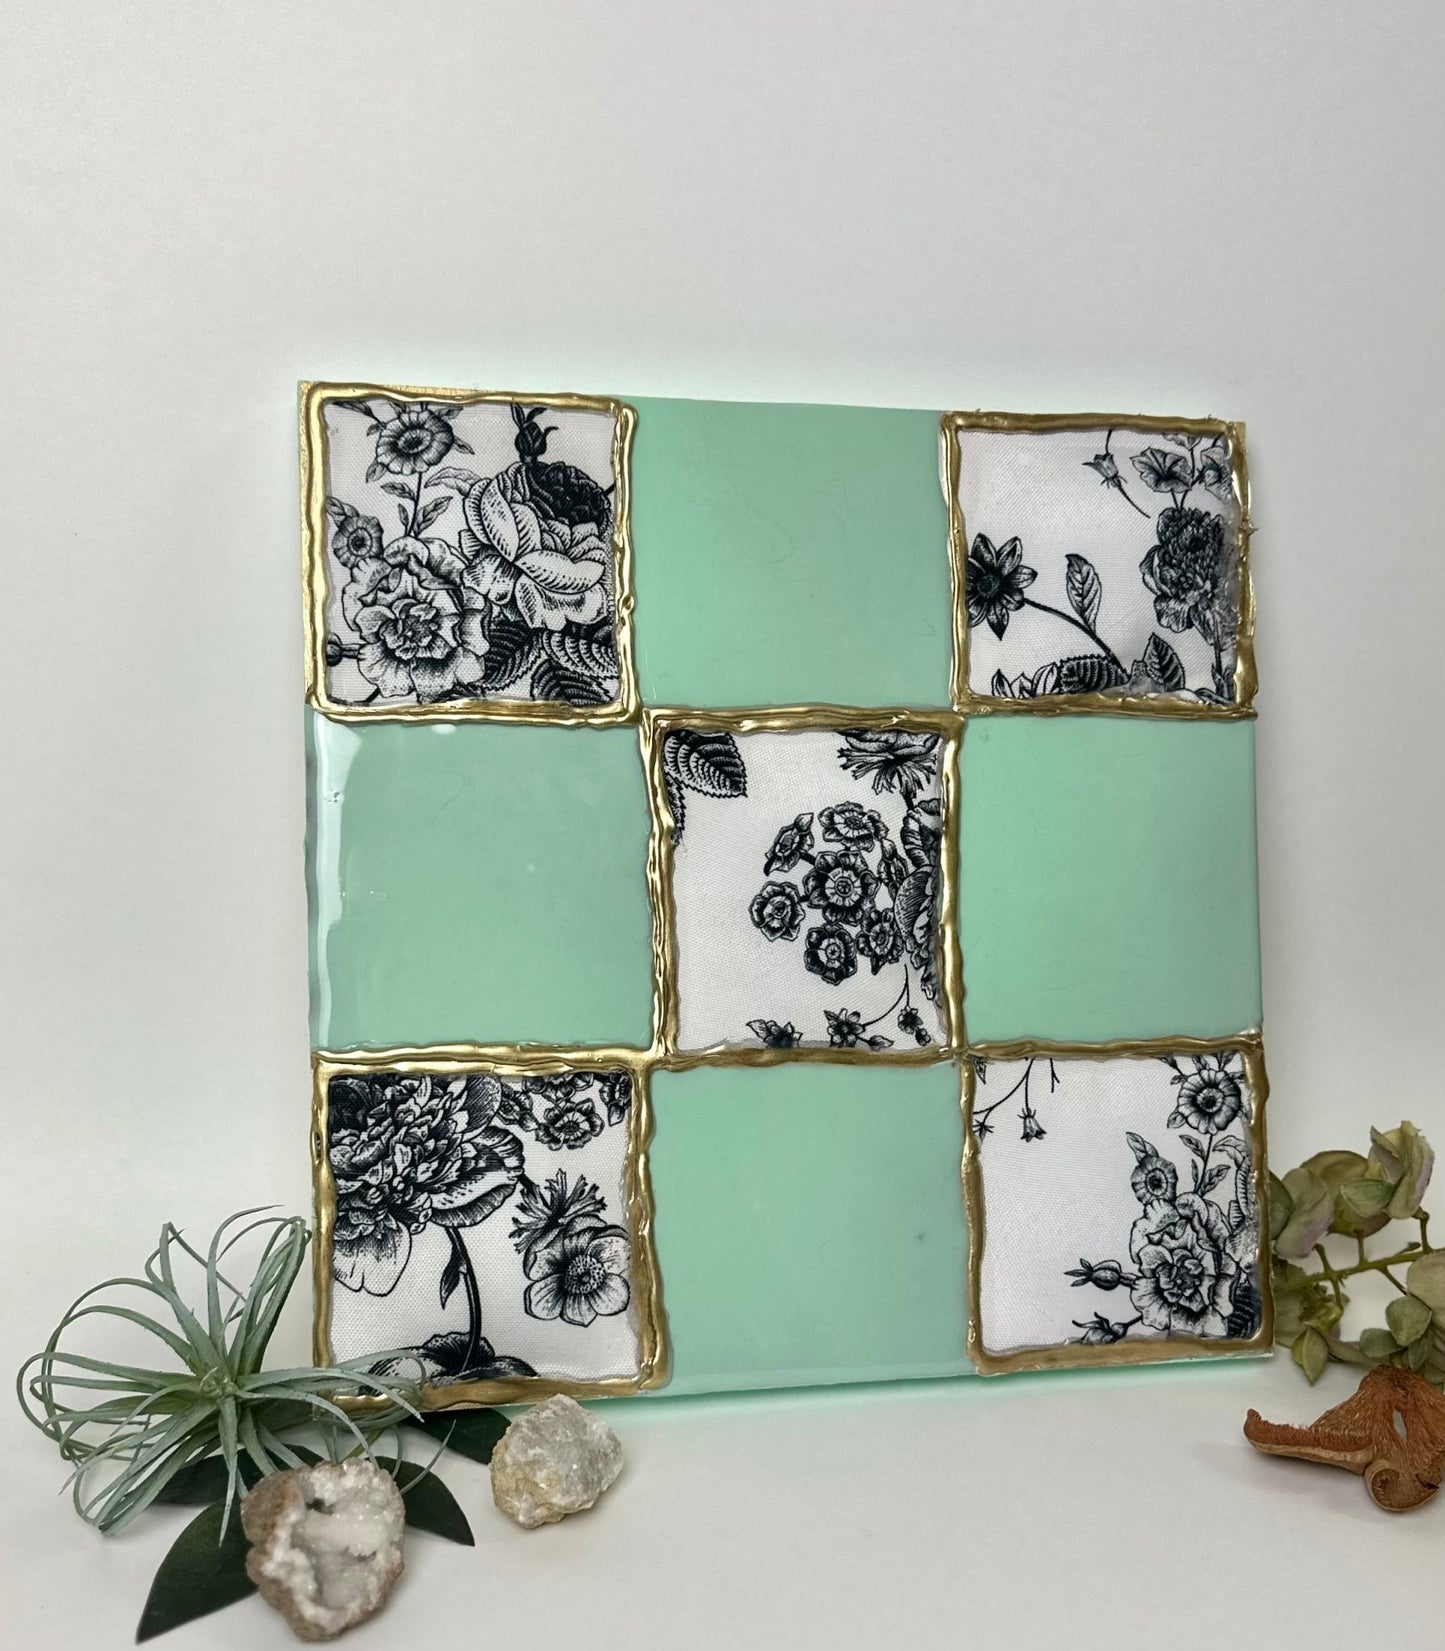 Mint and Floral Fabric - Bragg About It Artistry